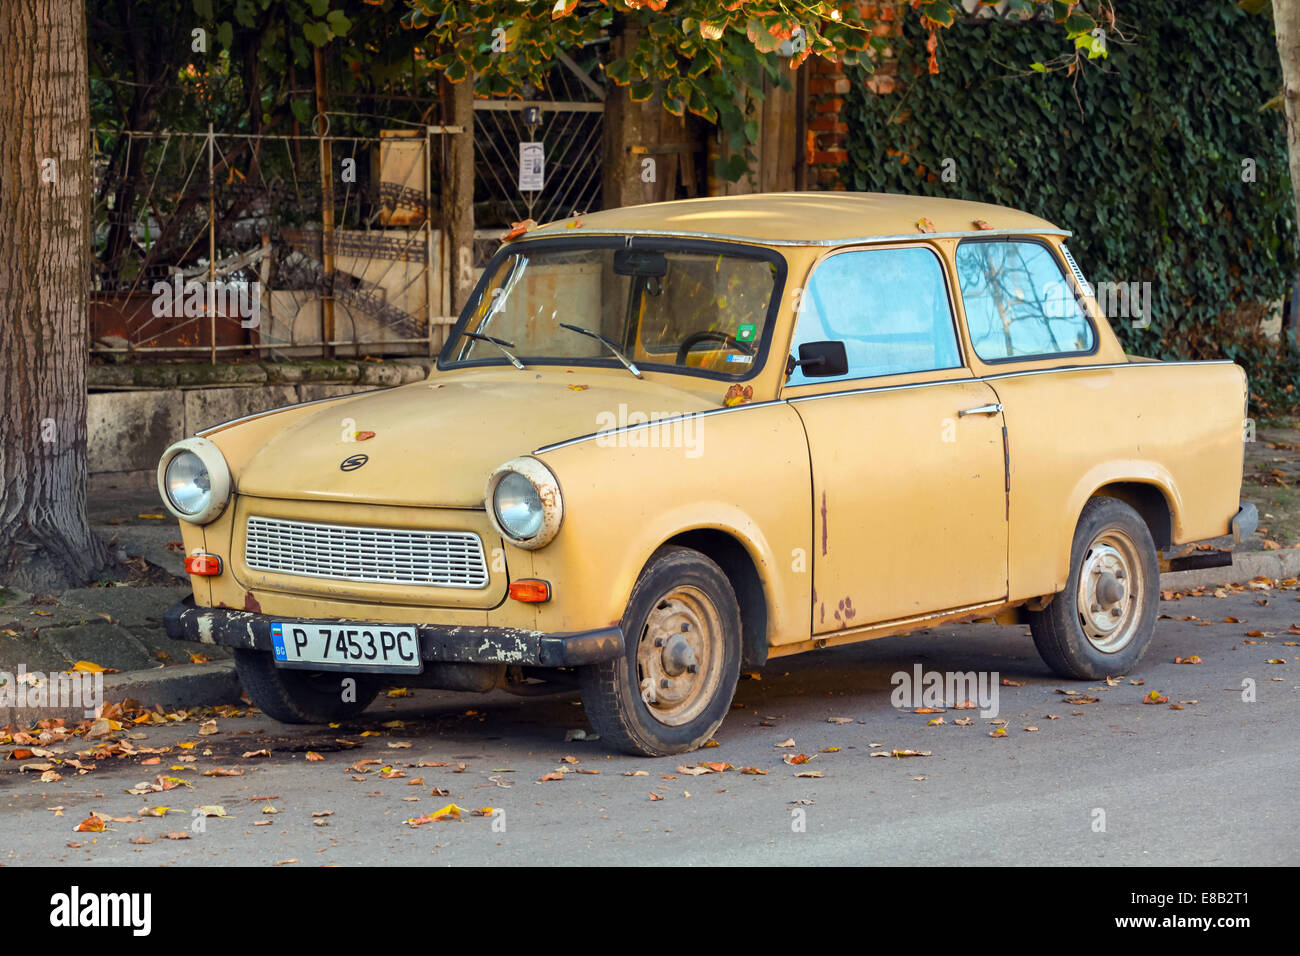 RUSE, BULGARIA - SEPTEMBER 29, 2014: Old yellow Trabant 601s car stands parked on a street side. It was the most common vehicle Stock Photo